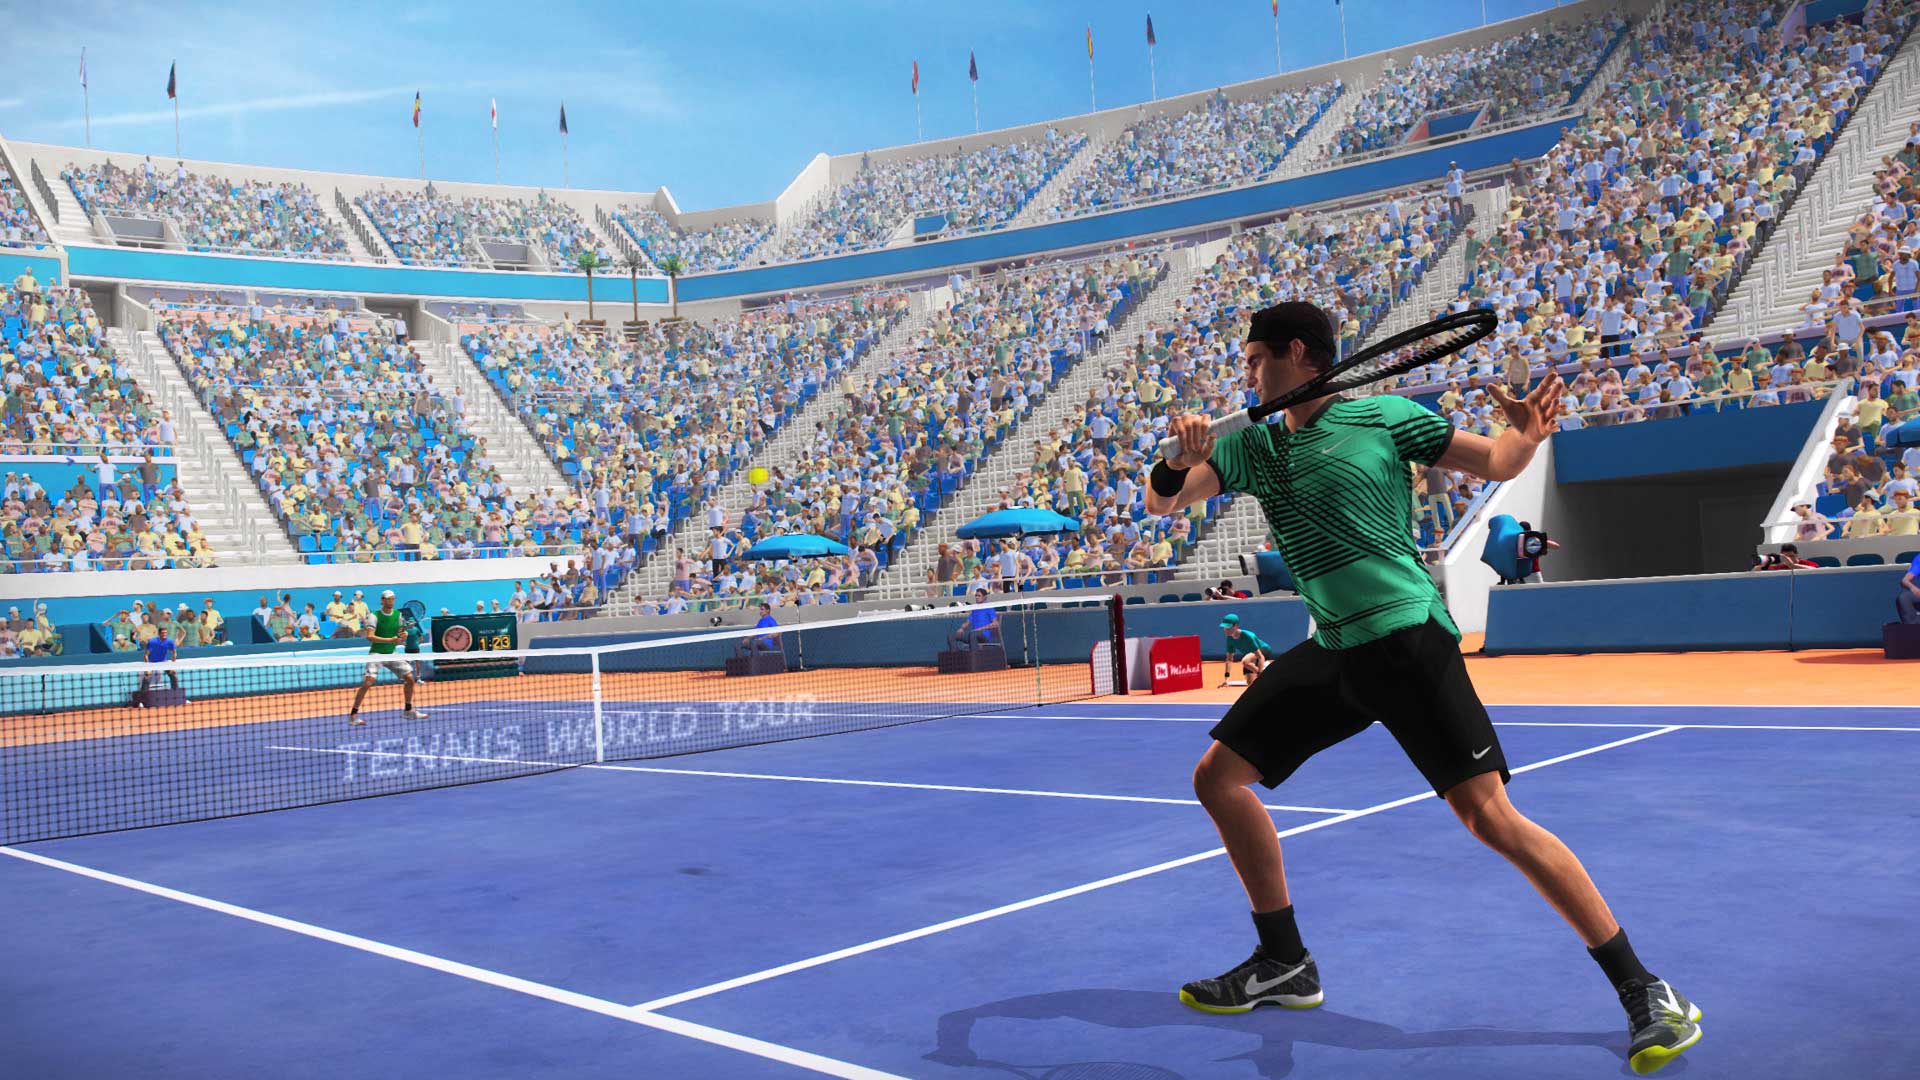 Tennis World Tour Update Patch Adds Online To Xbox One And PC